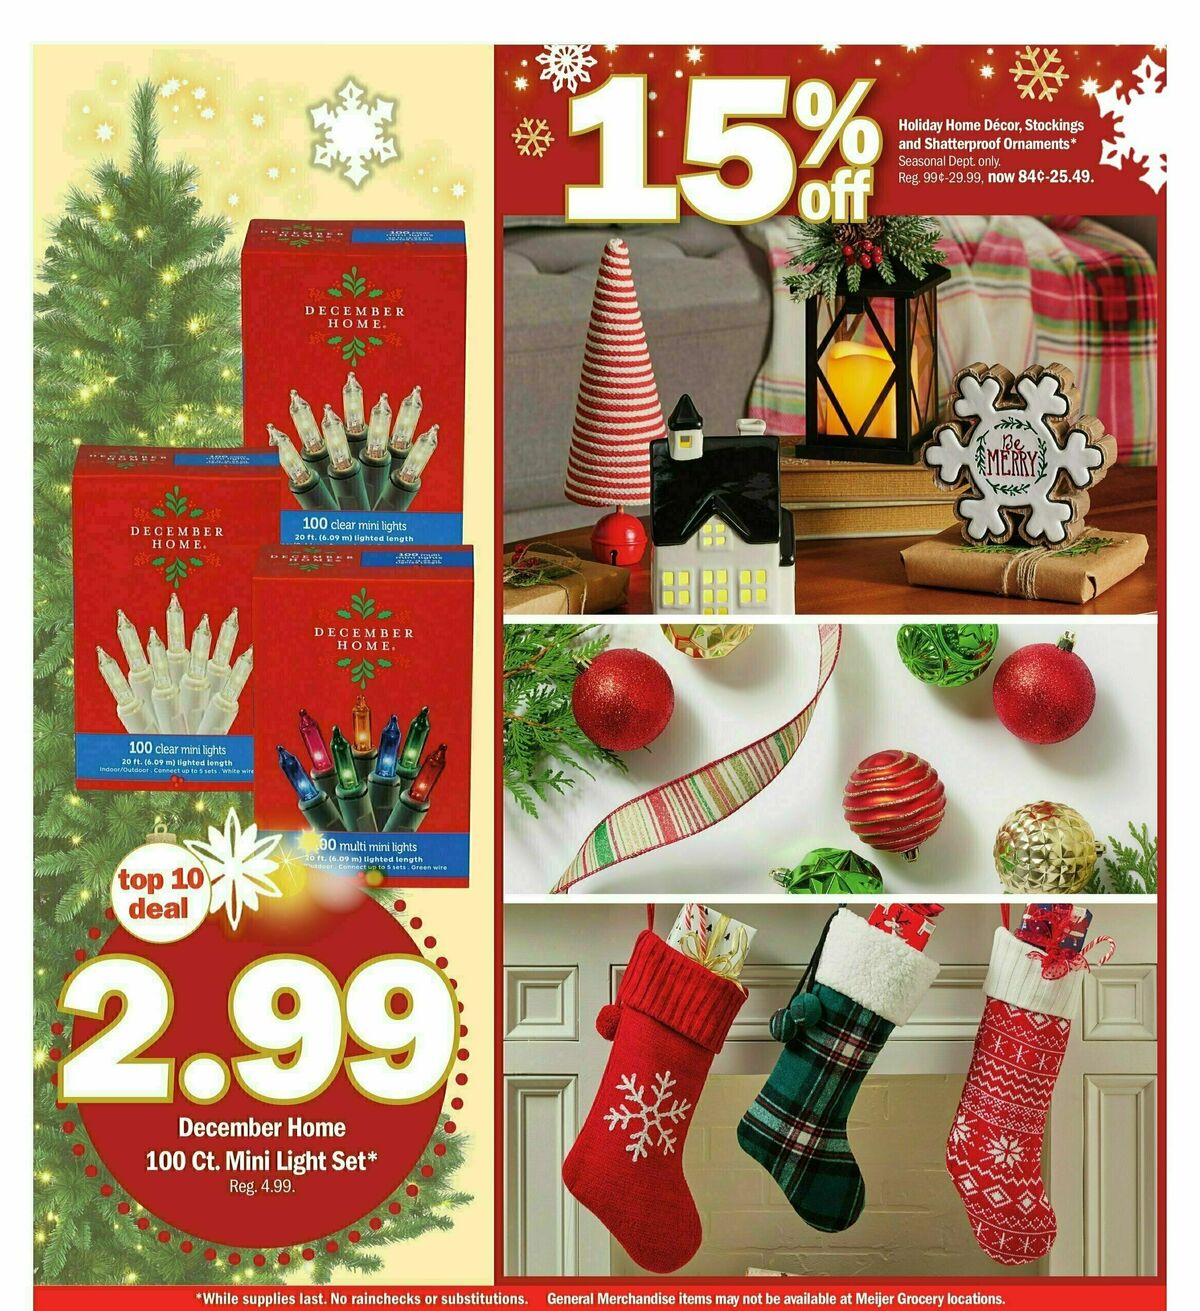 Meijer Holiday Ad Weekly Ad from November 5